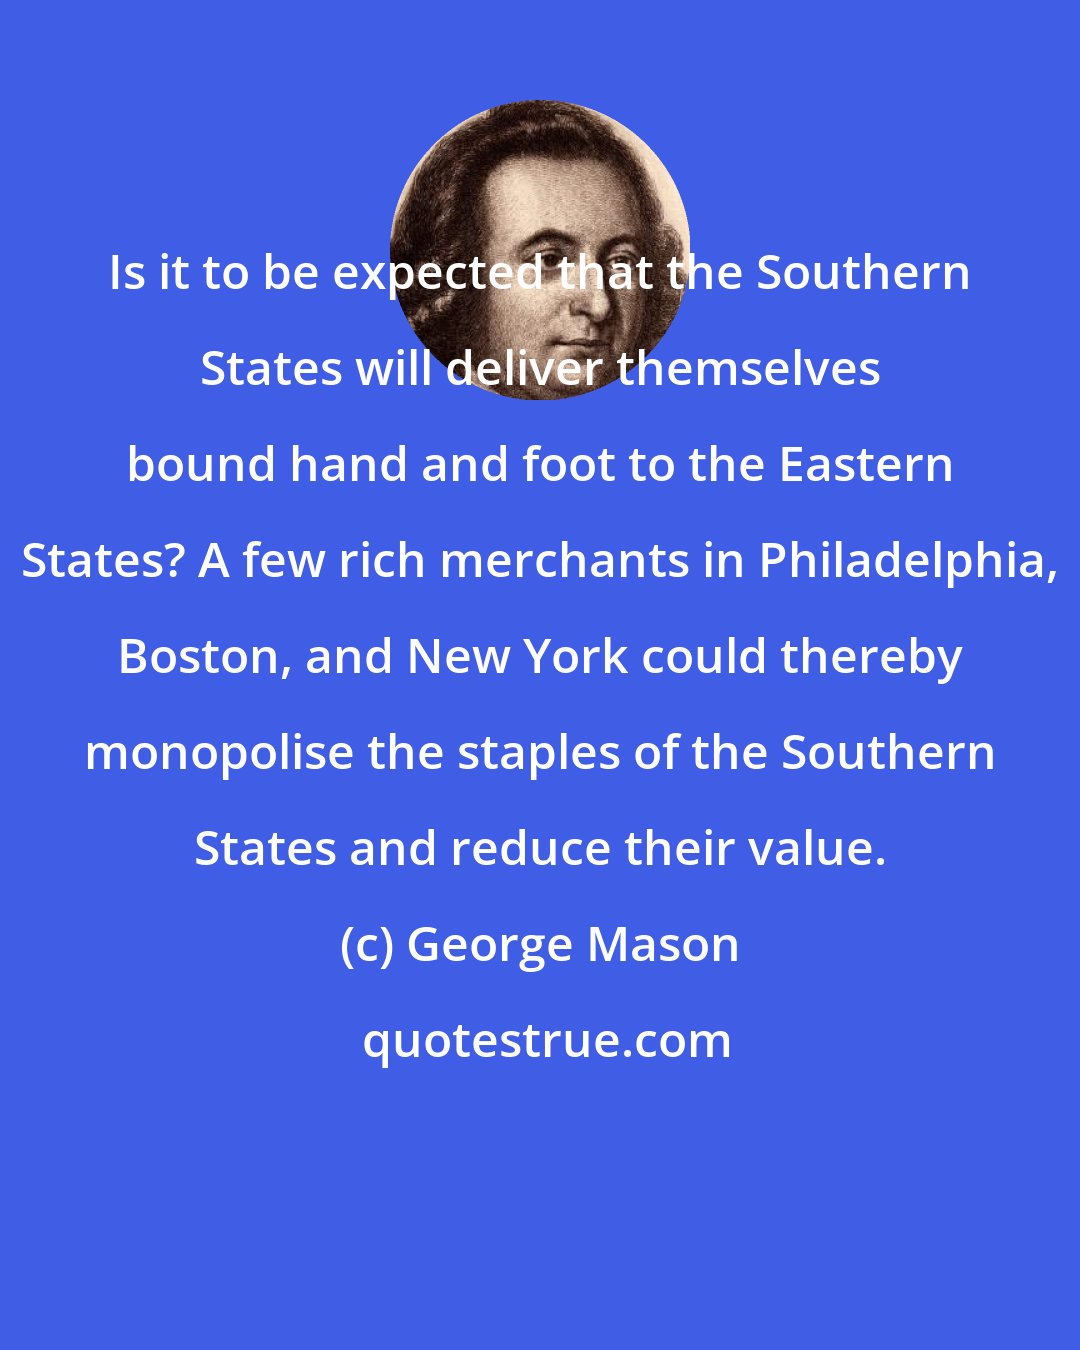 George Mason: Is it to be expected that the Southern States will deliver themselves bound hand and foot to the Eastern States? A few rich merchants in Philadelphia, Boston, and New York could thereby monopolise the staples of the Southern States and reduce their value.